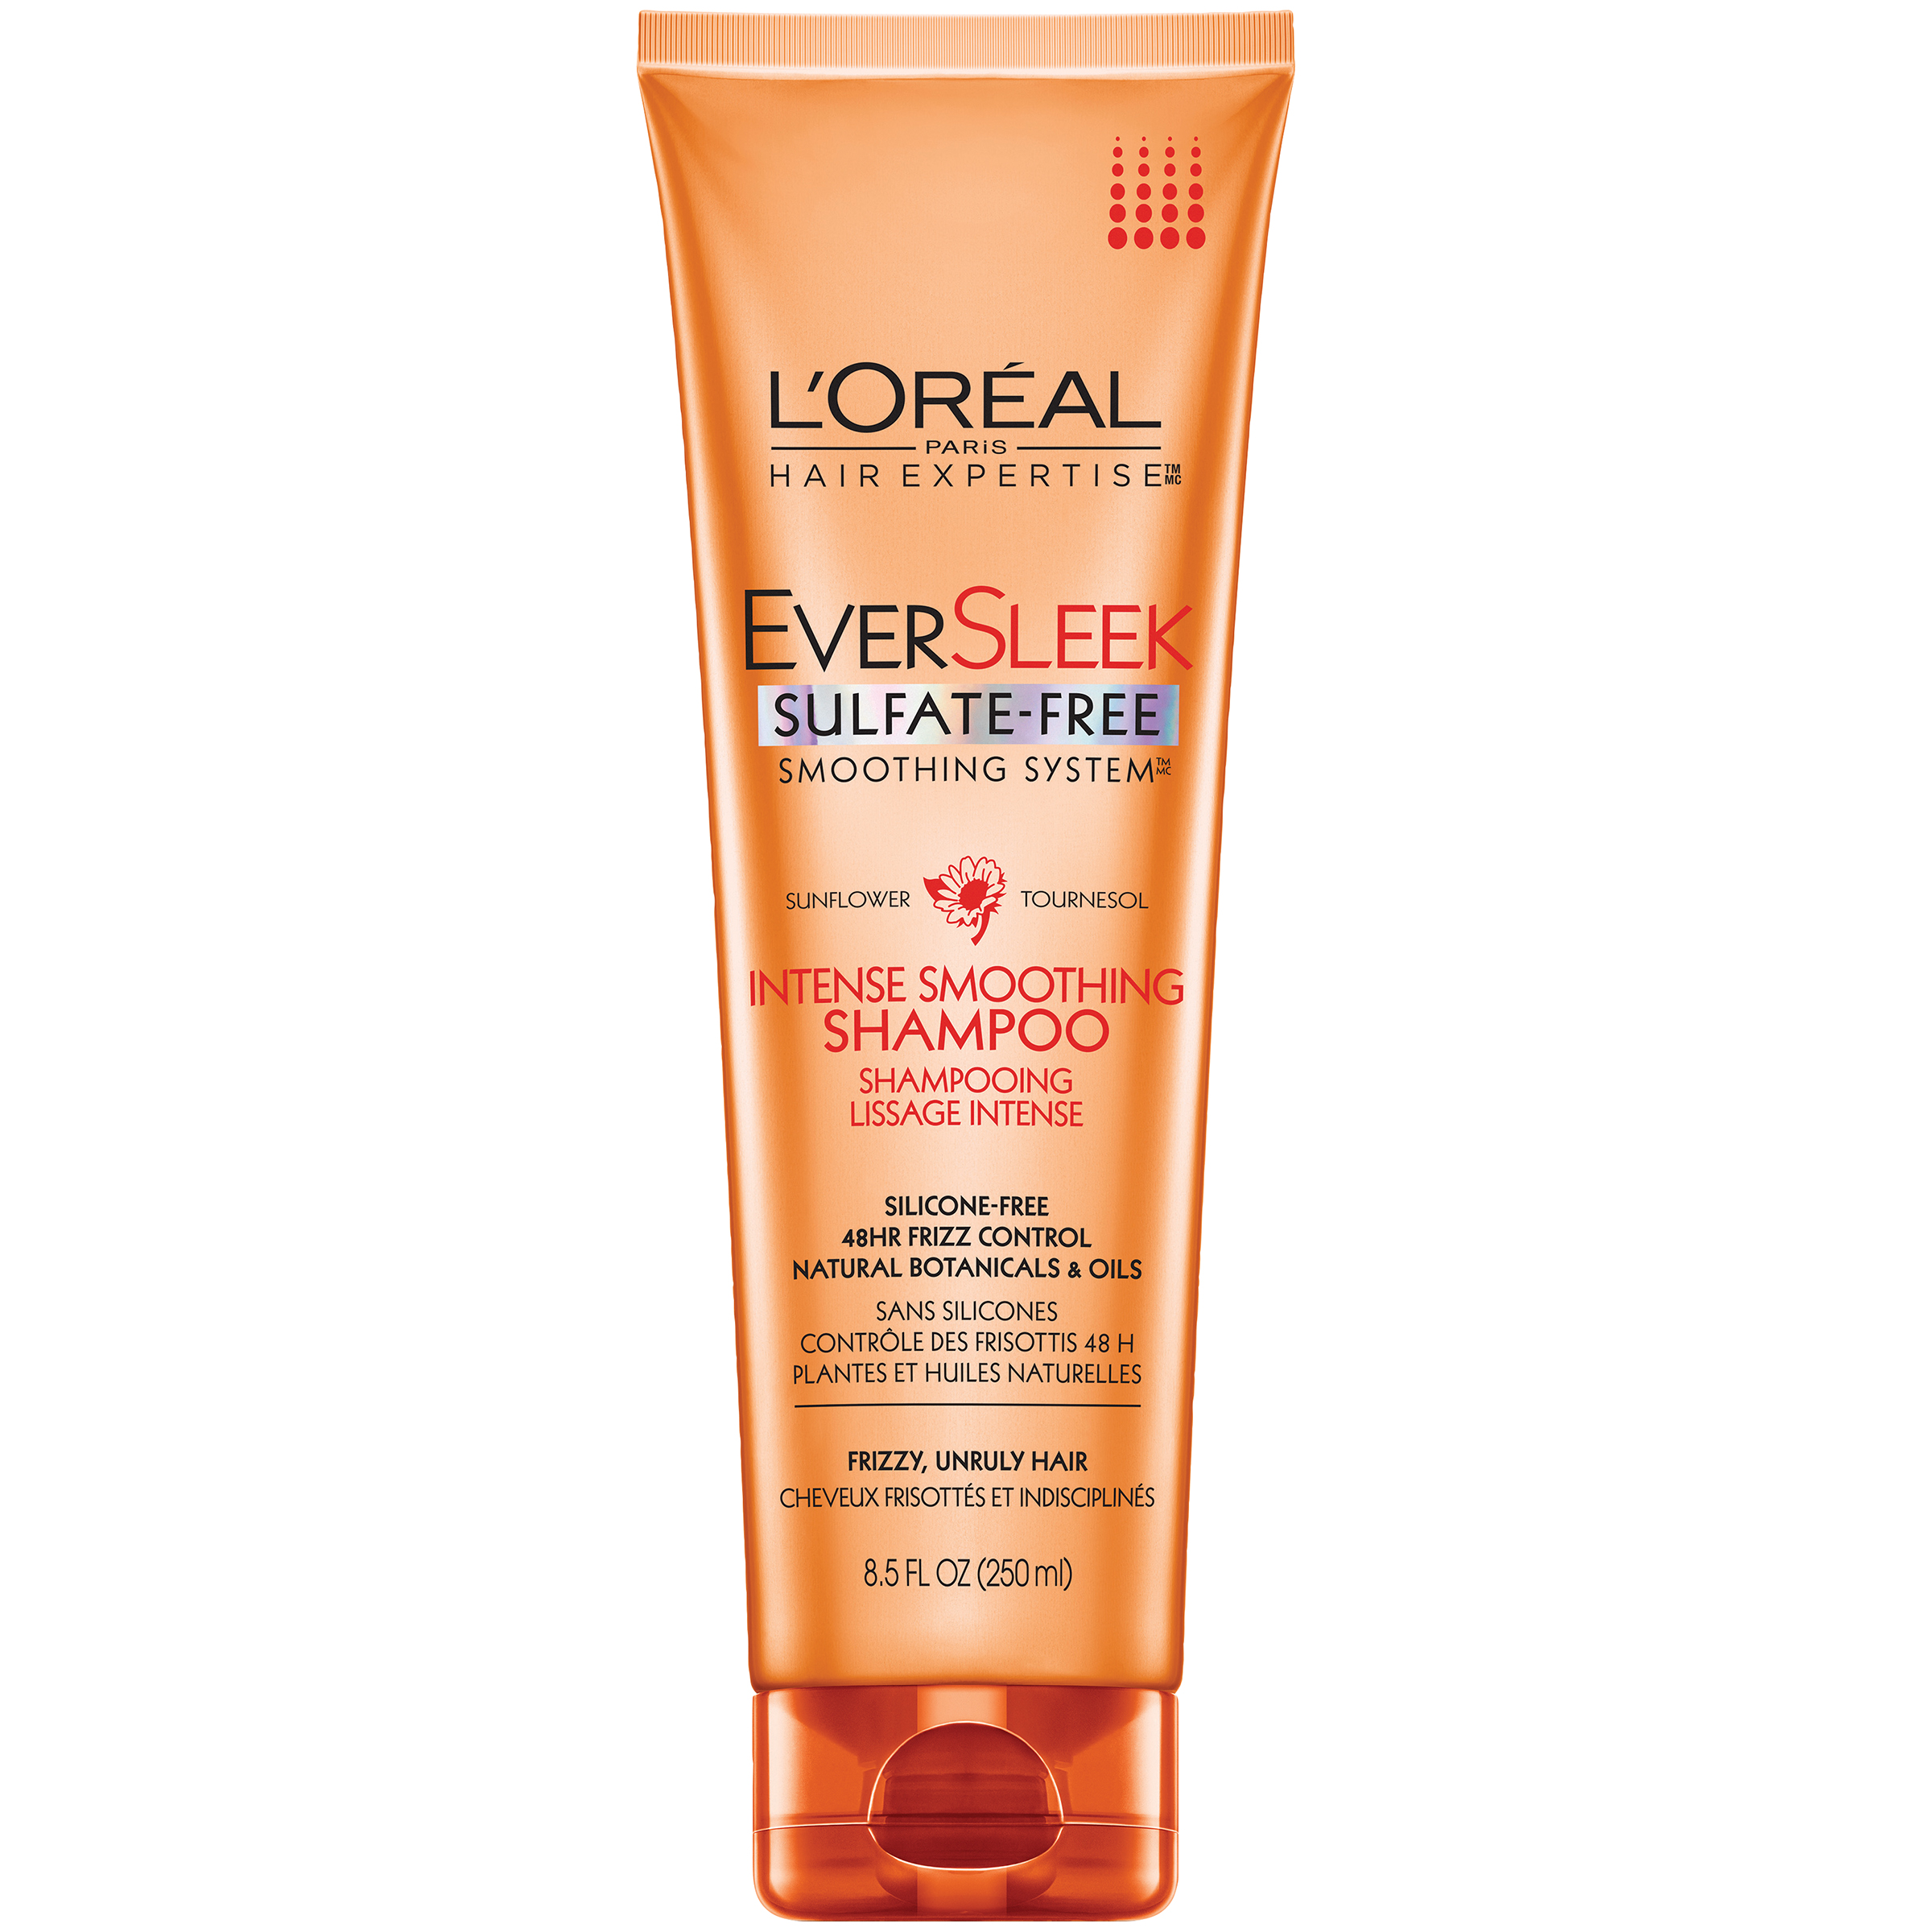 L'Oreal Sulfate-Free Smoothing System Intense Smoothing Shampoo 8.5 OZ